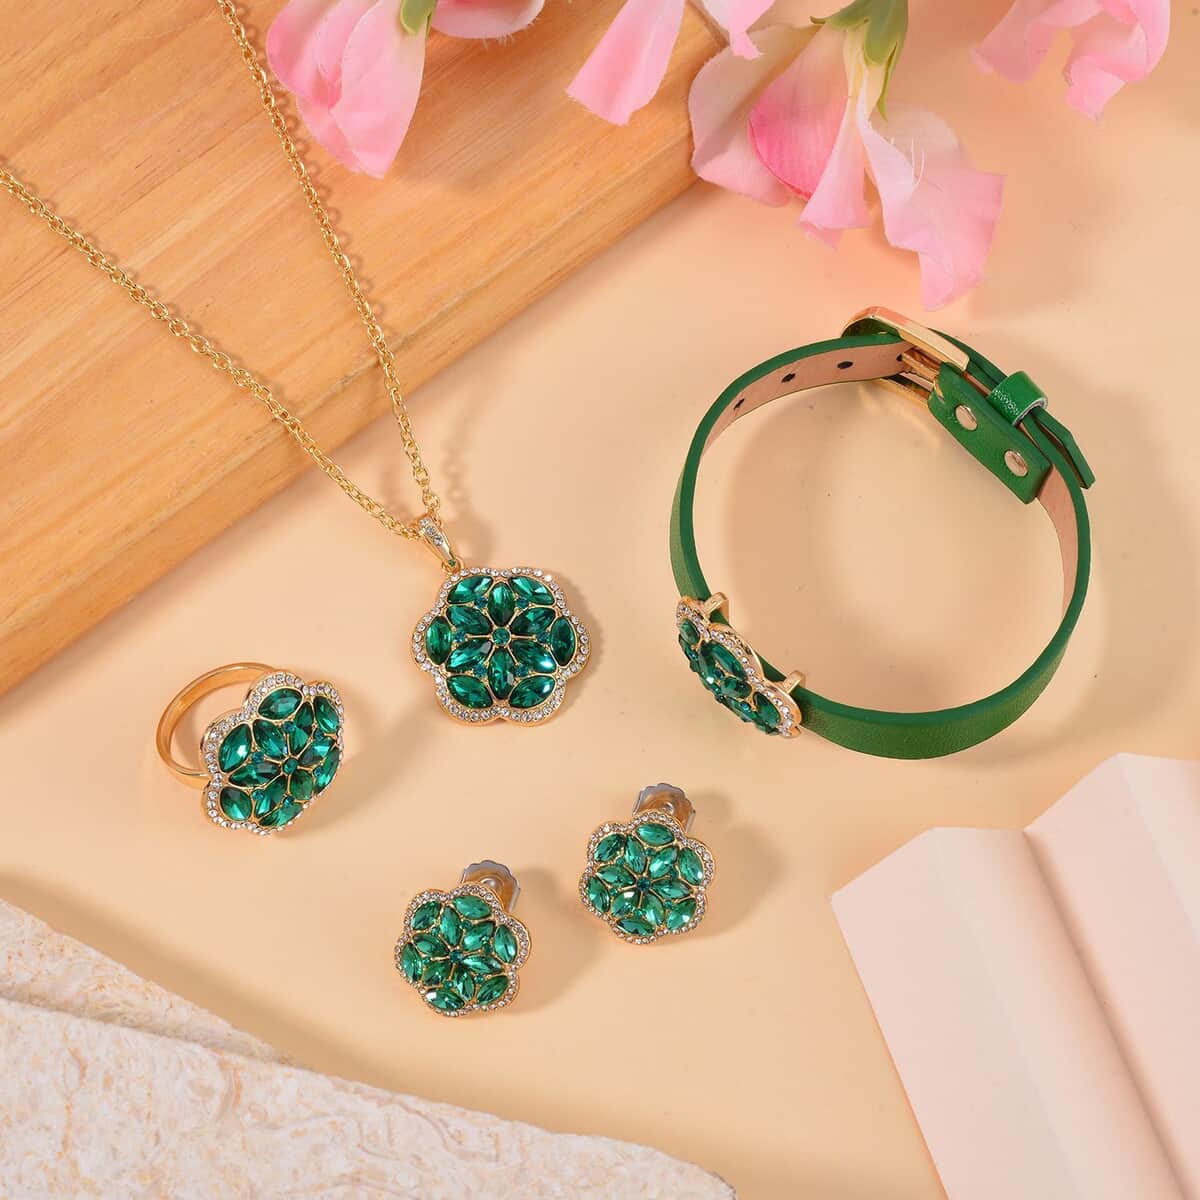 Green and White Austrian Crystal, Faux Leather Floral Bracelet (6-8In), Earrings, Ring (Size 7.0) and Pendant Necklace 20-22 Inches In Goldtone image number 1